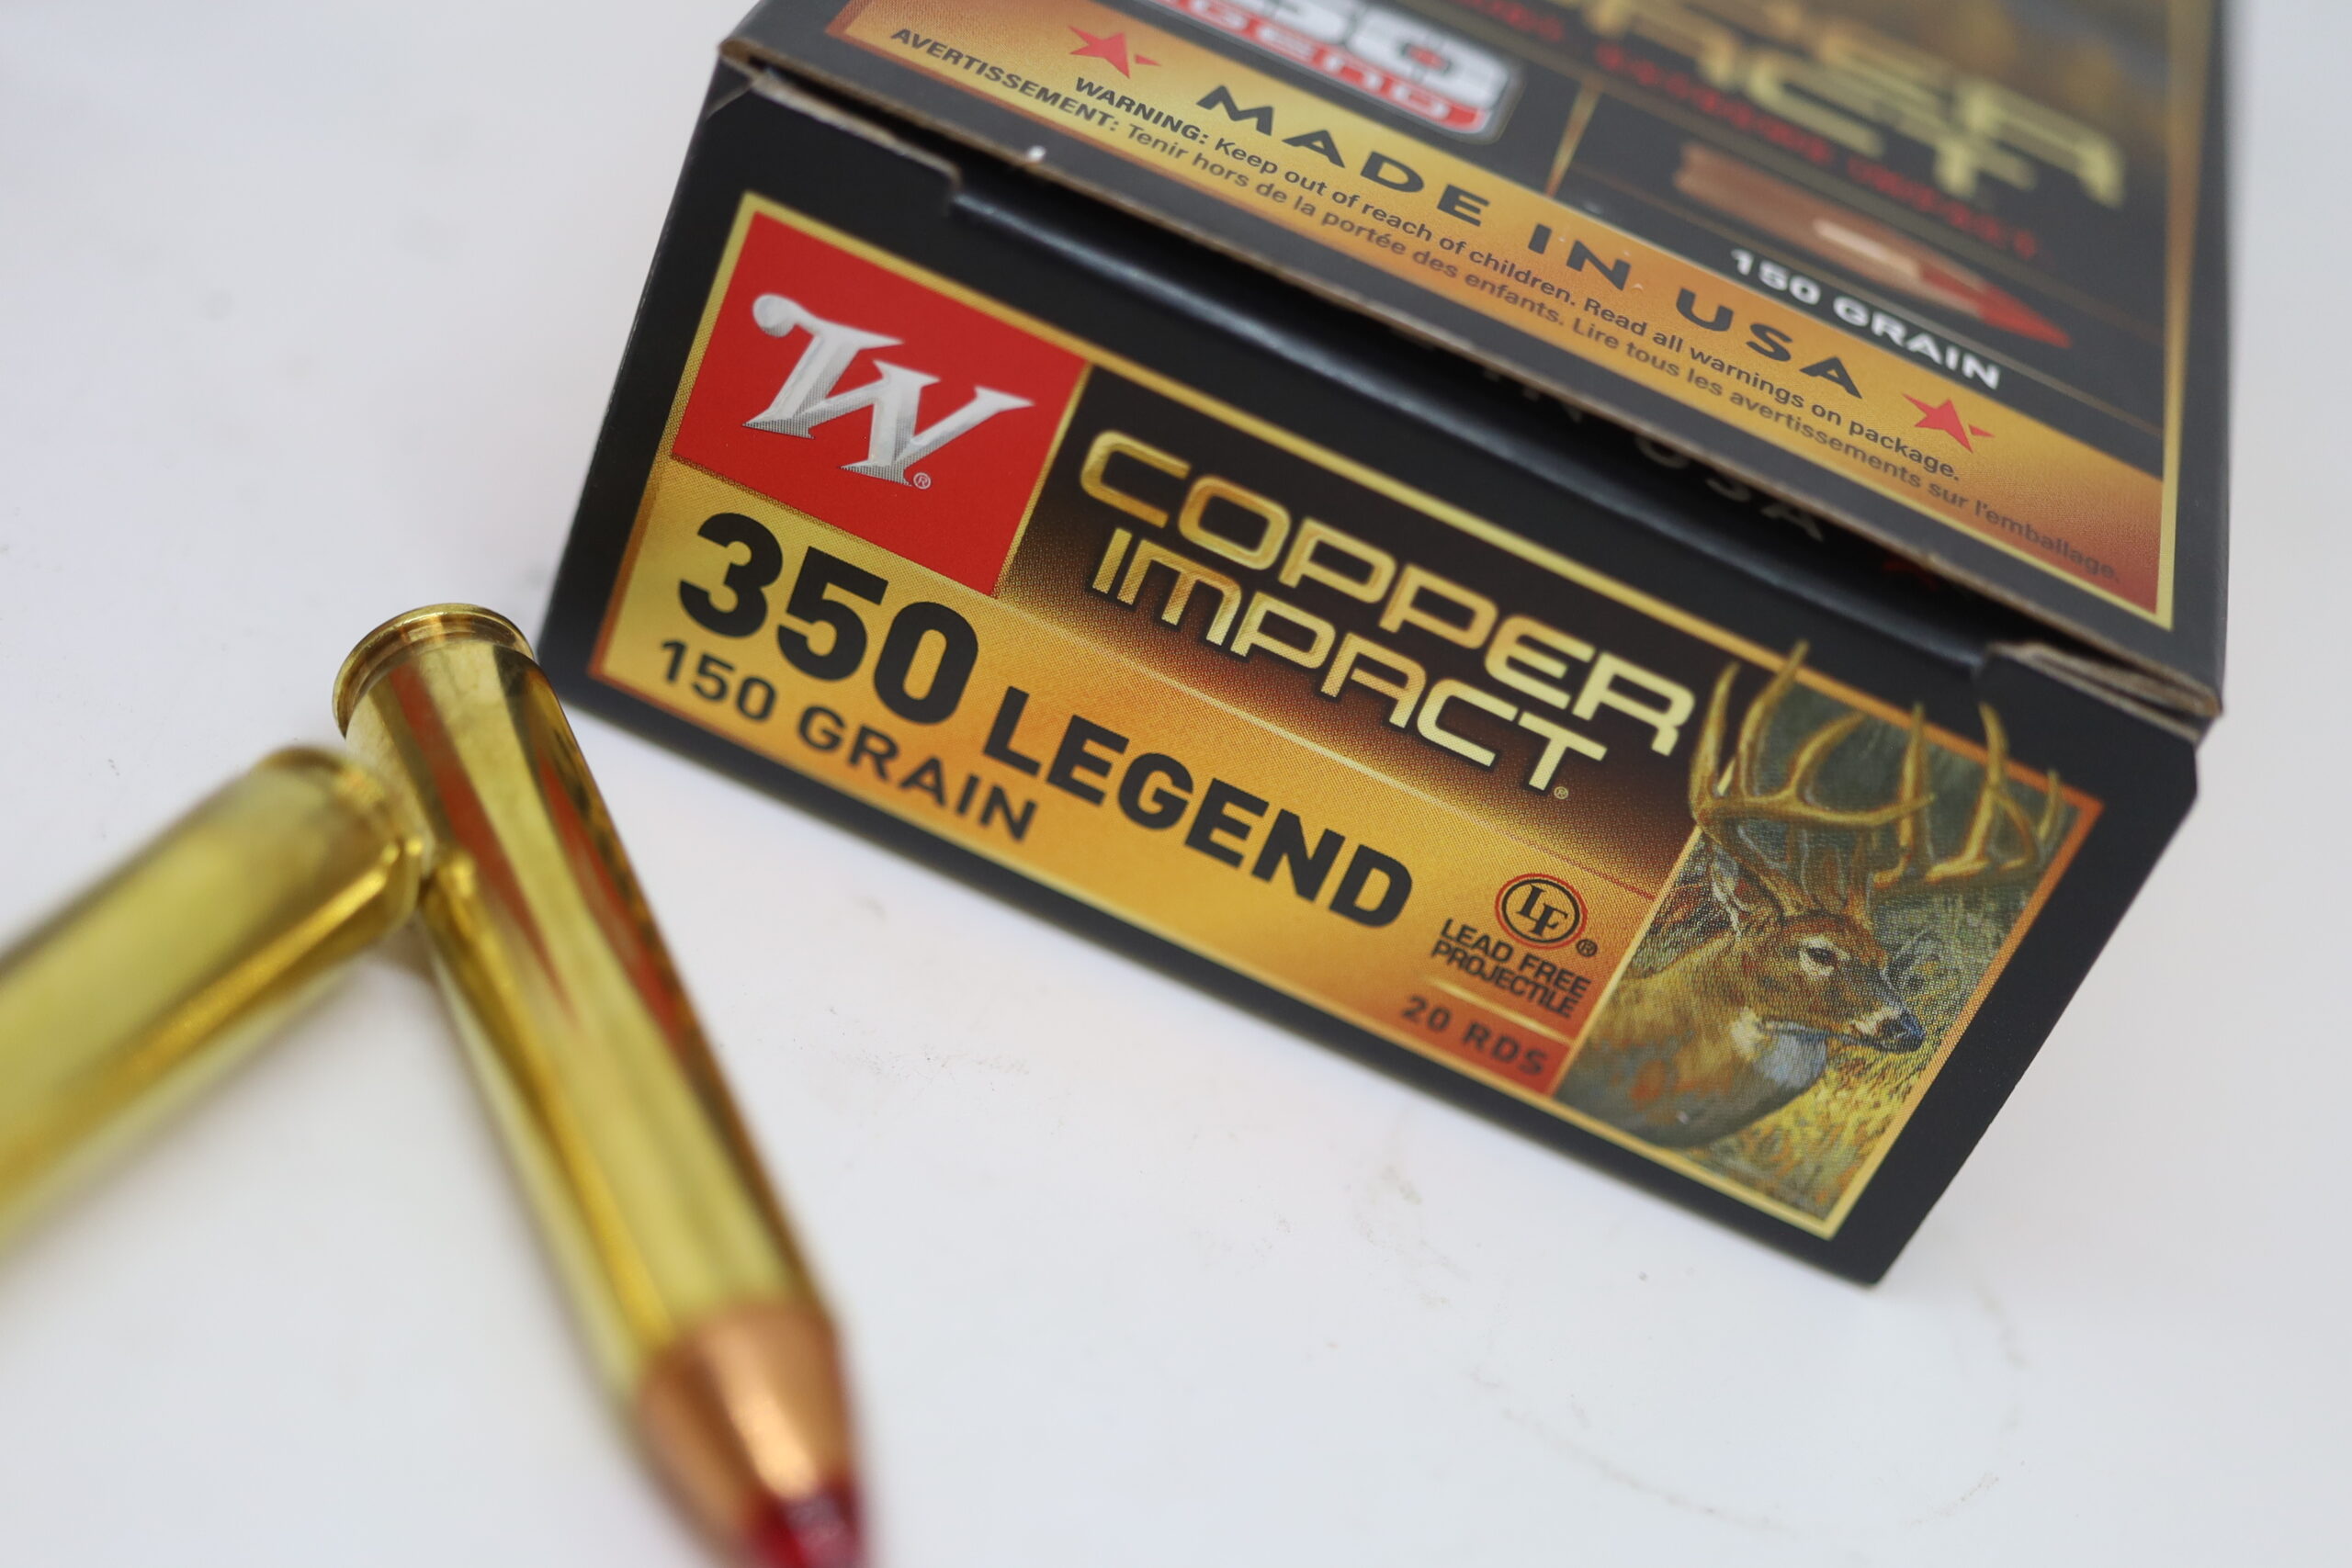 The .350 Legend was released in 2019.